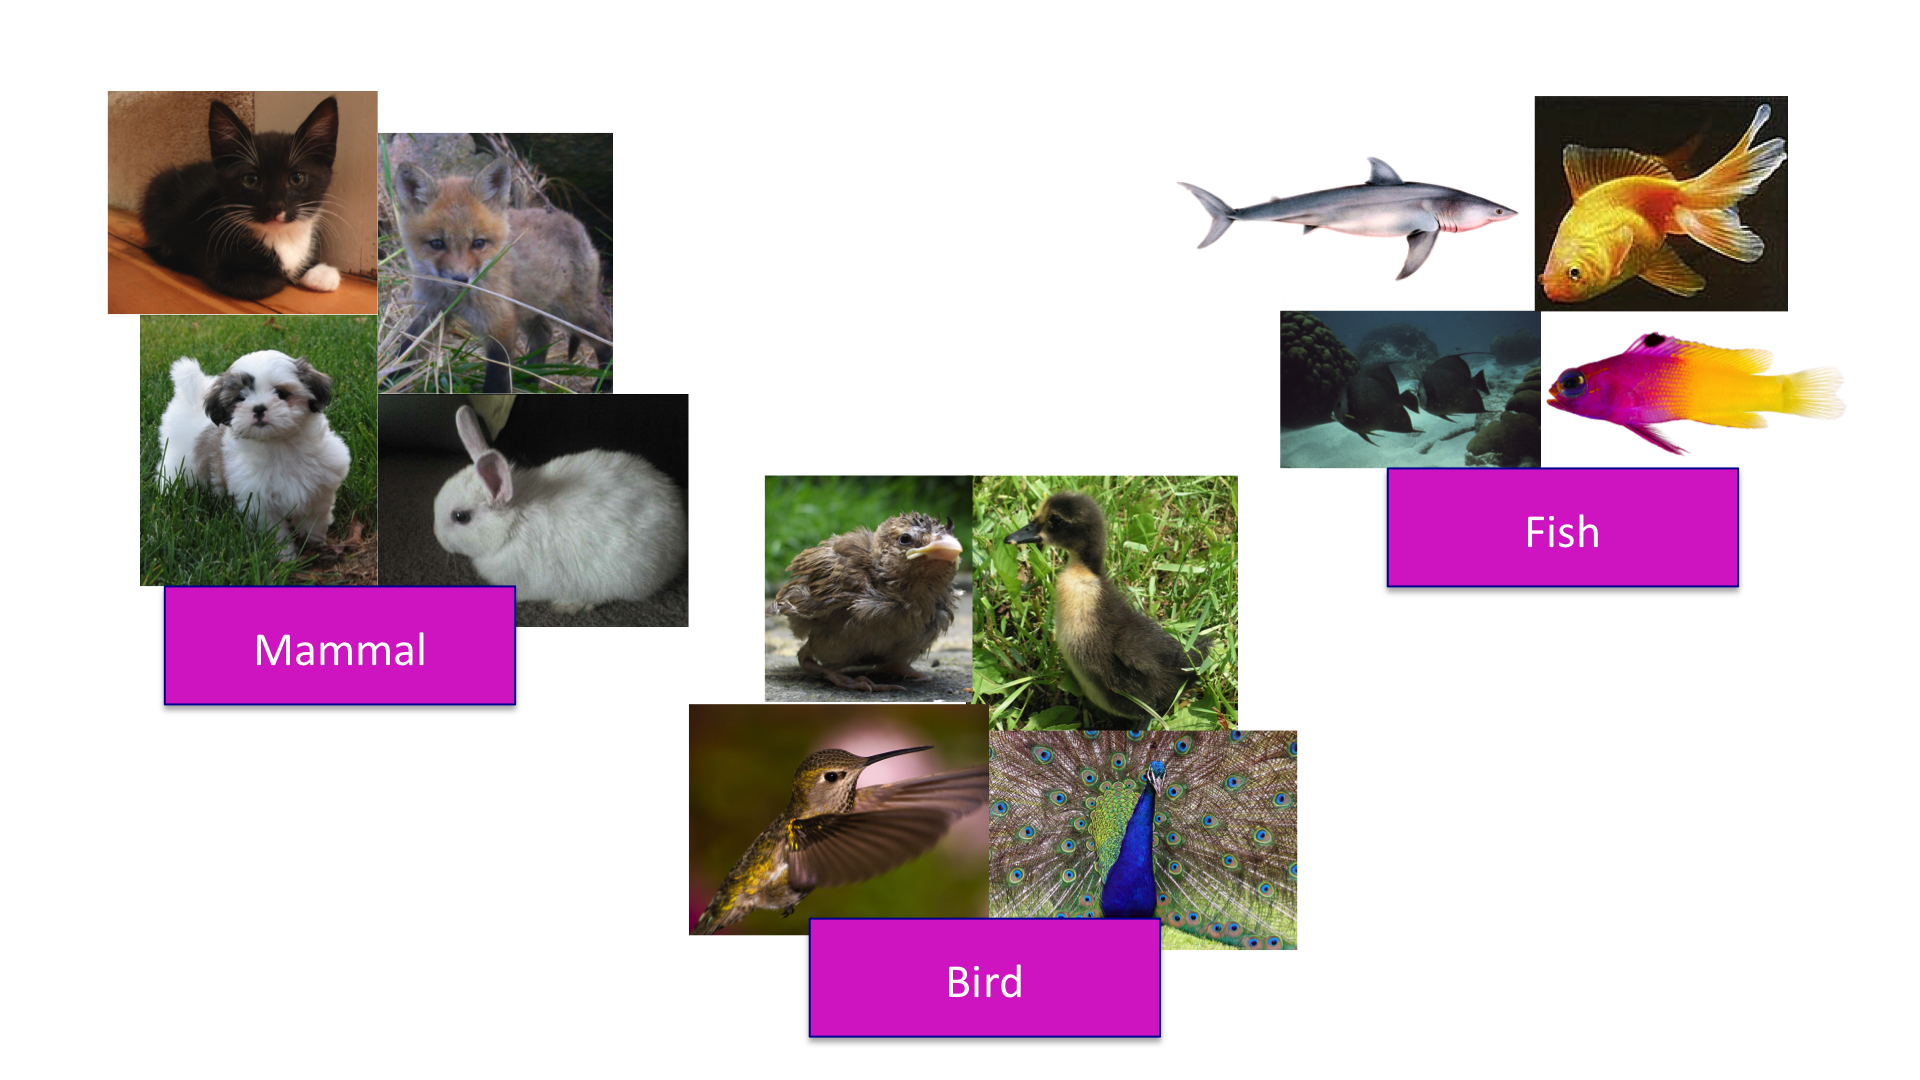 Clustering of animals